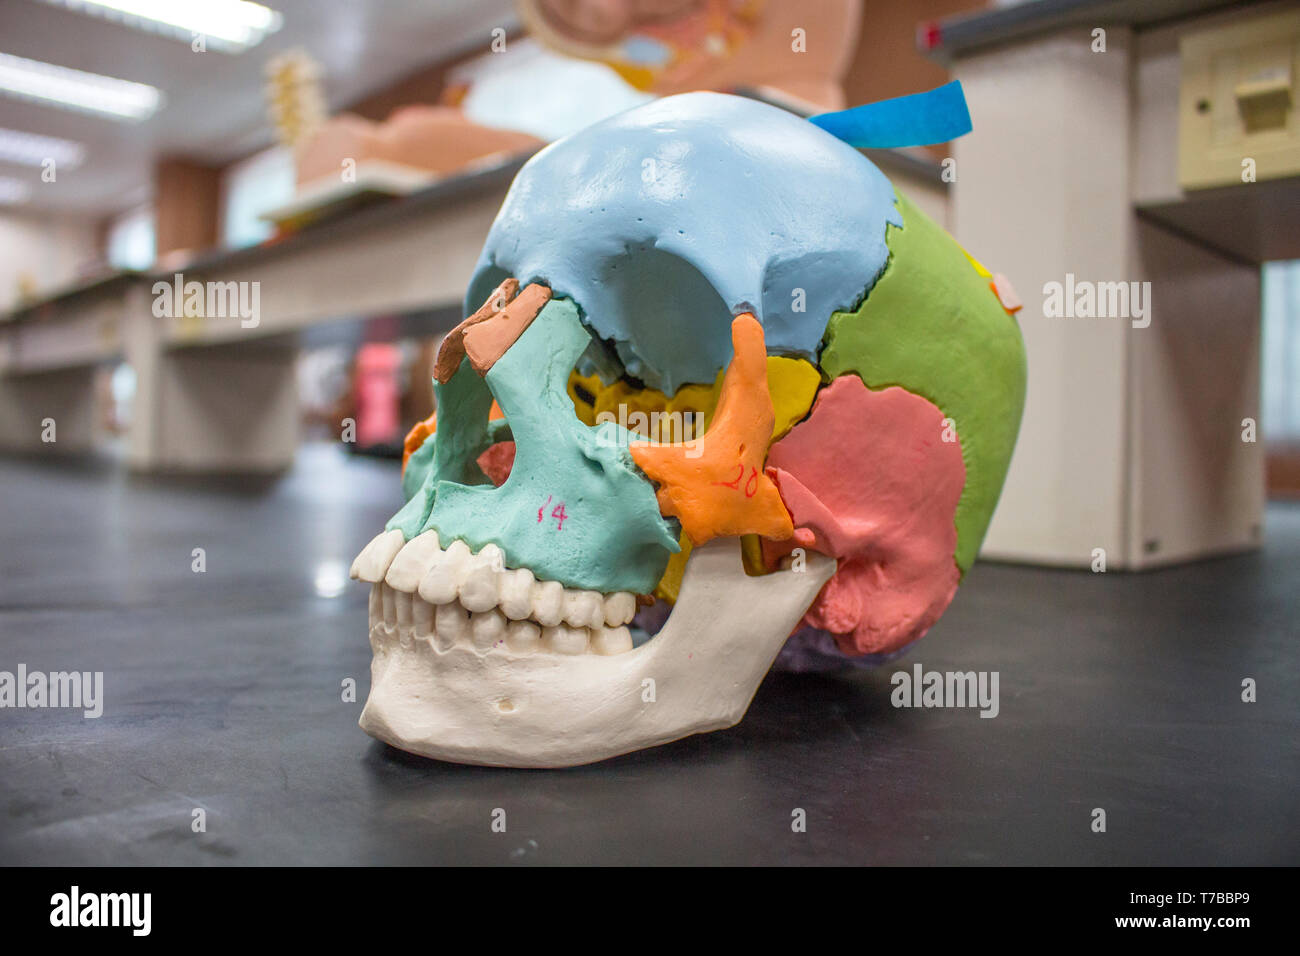 Colored skull model for studying and labelled, located inside laboratory with posterior, medial view, showing the occipital and parietal bones. Stock Photo